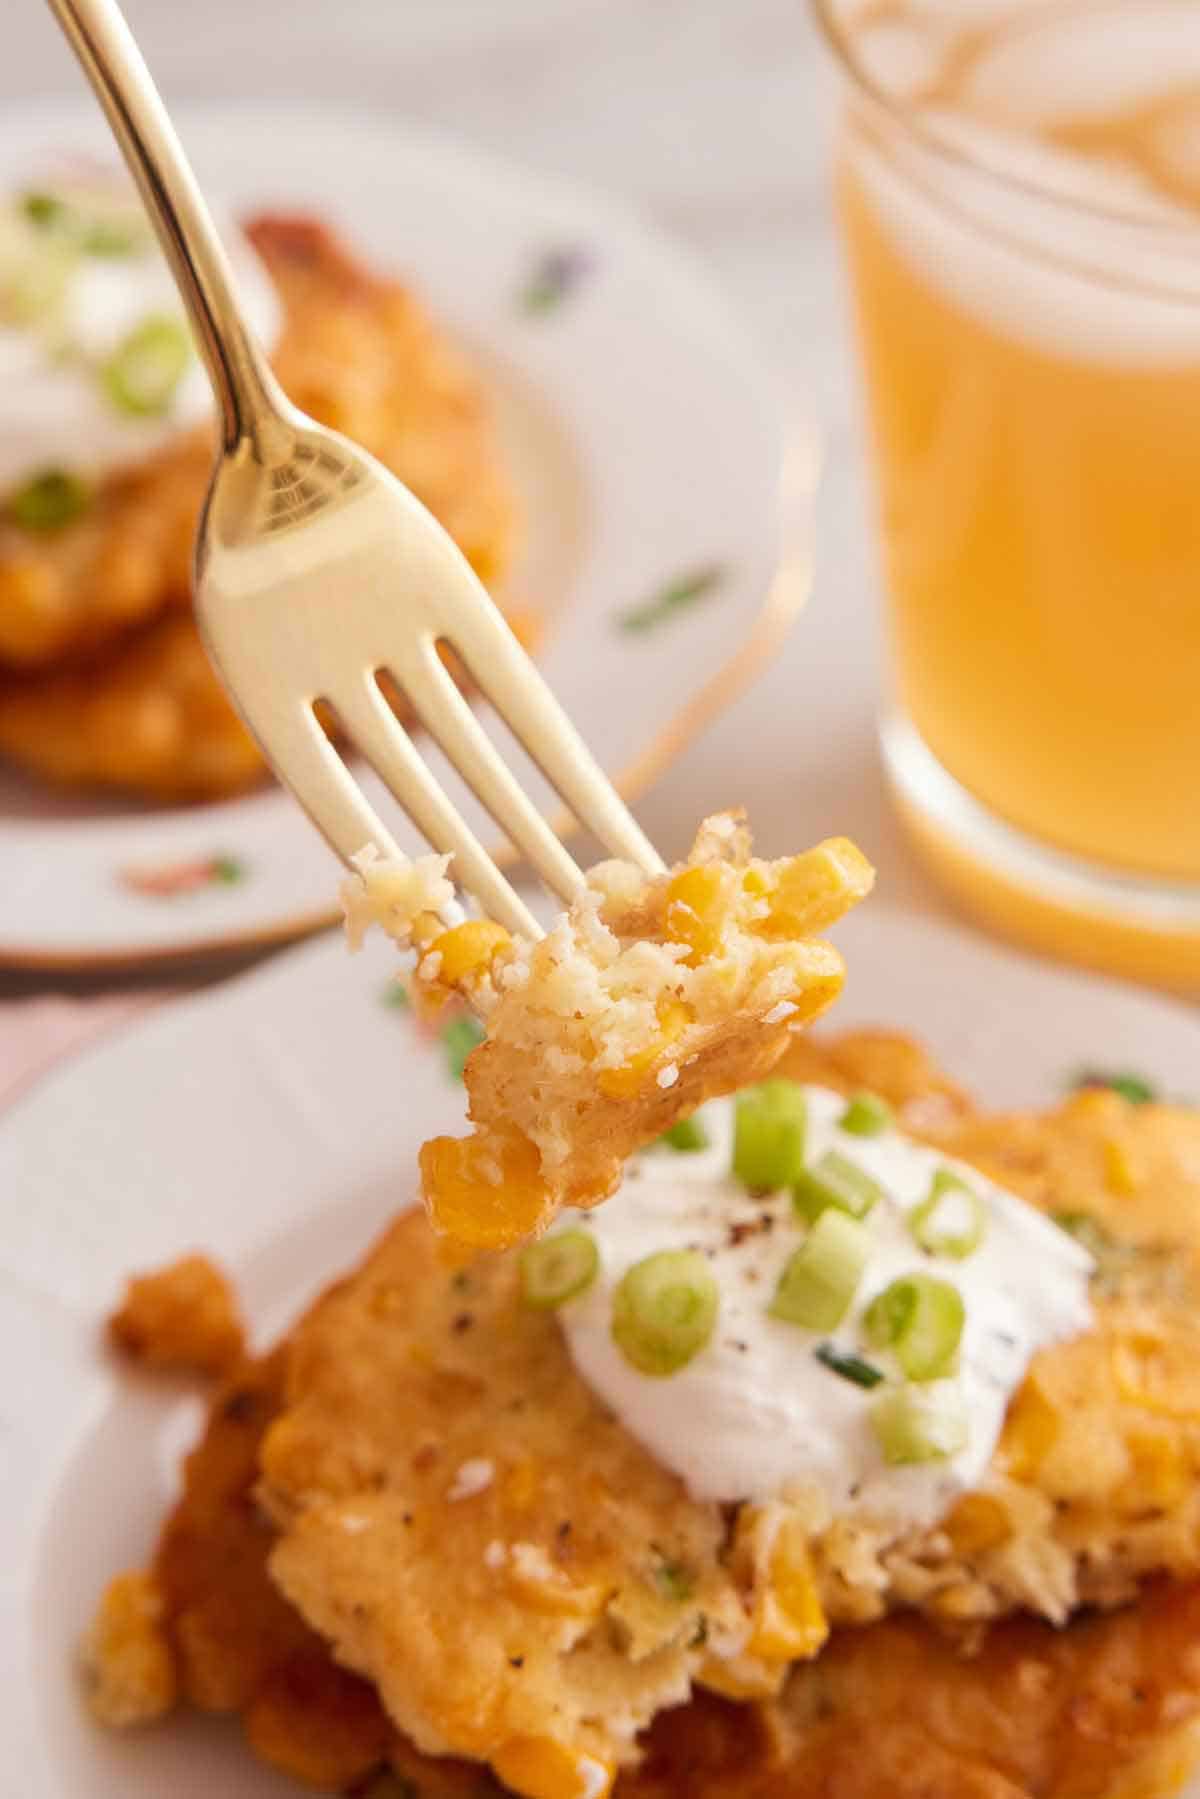 A fork lifting up a bite of corn fritters from a plate of fritters topped with sour cream and green onions.